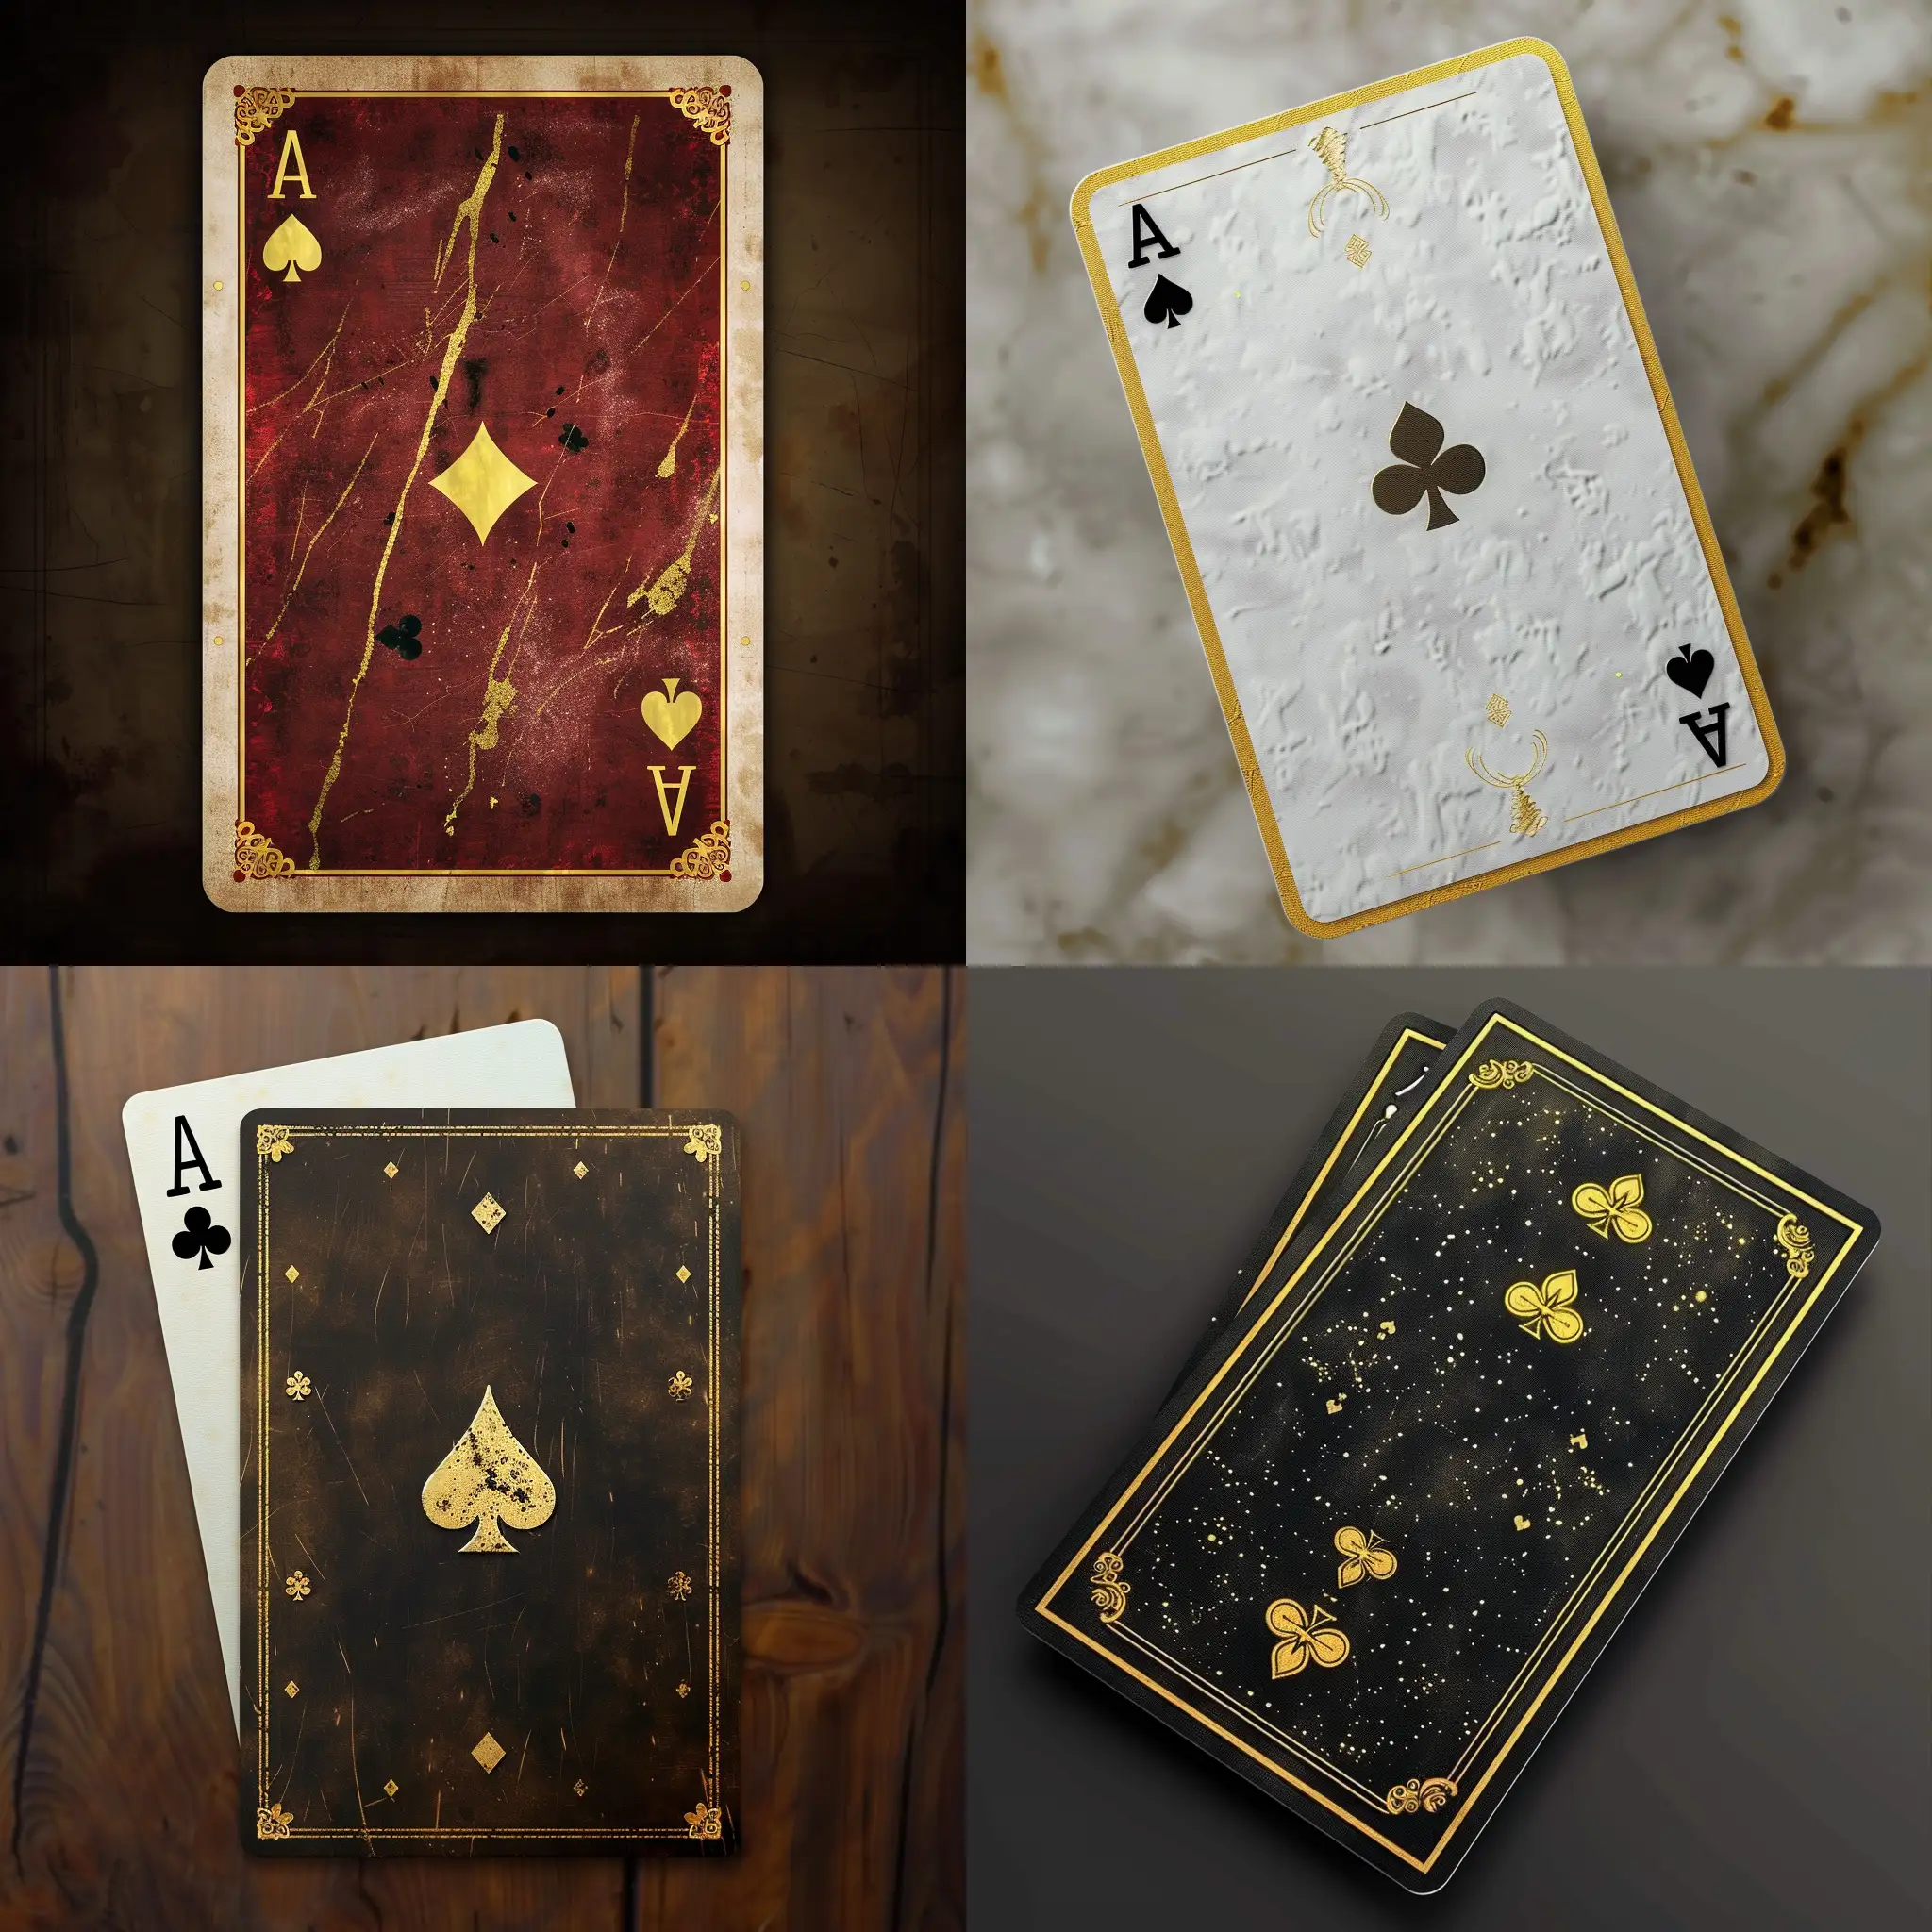 Playing card design with golden trims on the edges of it and a unique style texture